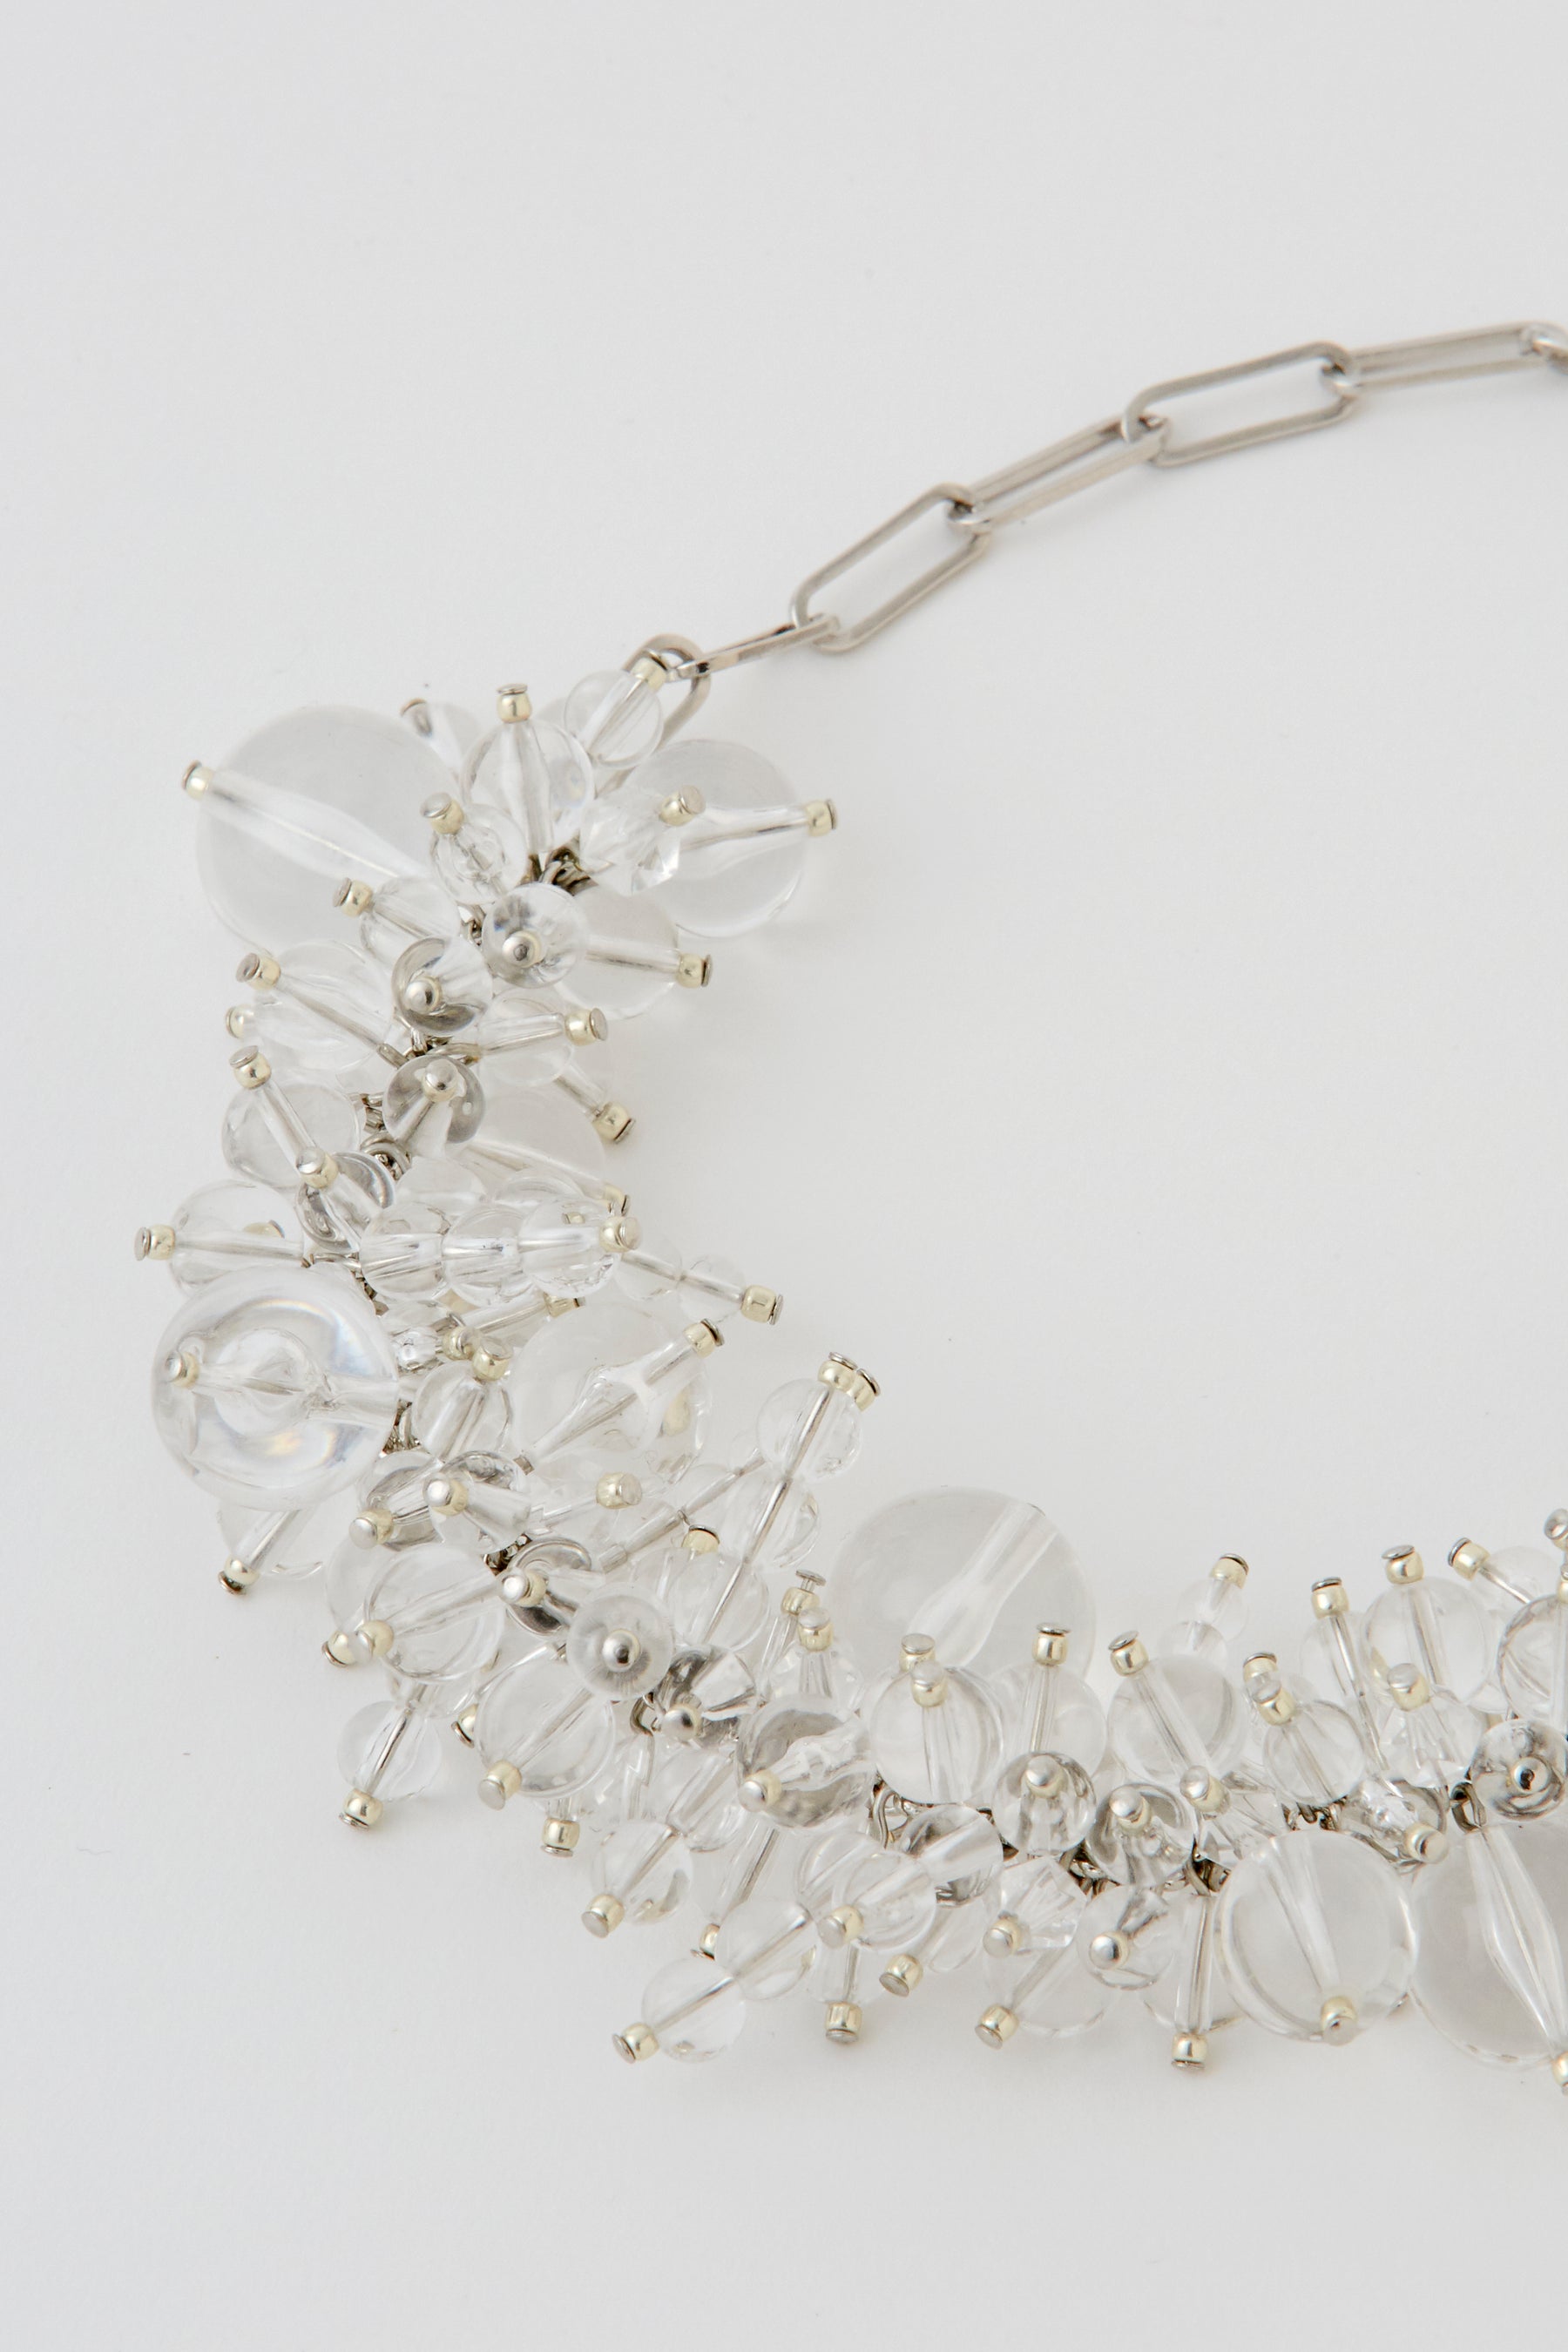 Dripping clear necklace (Silver)